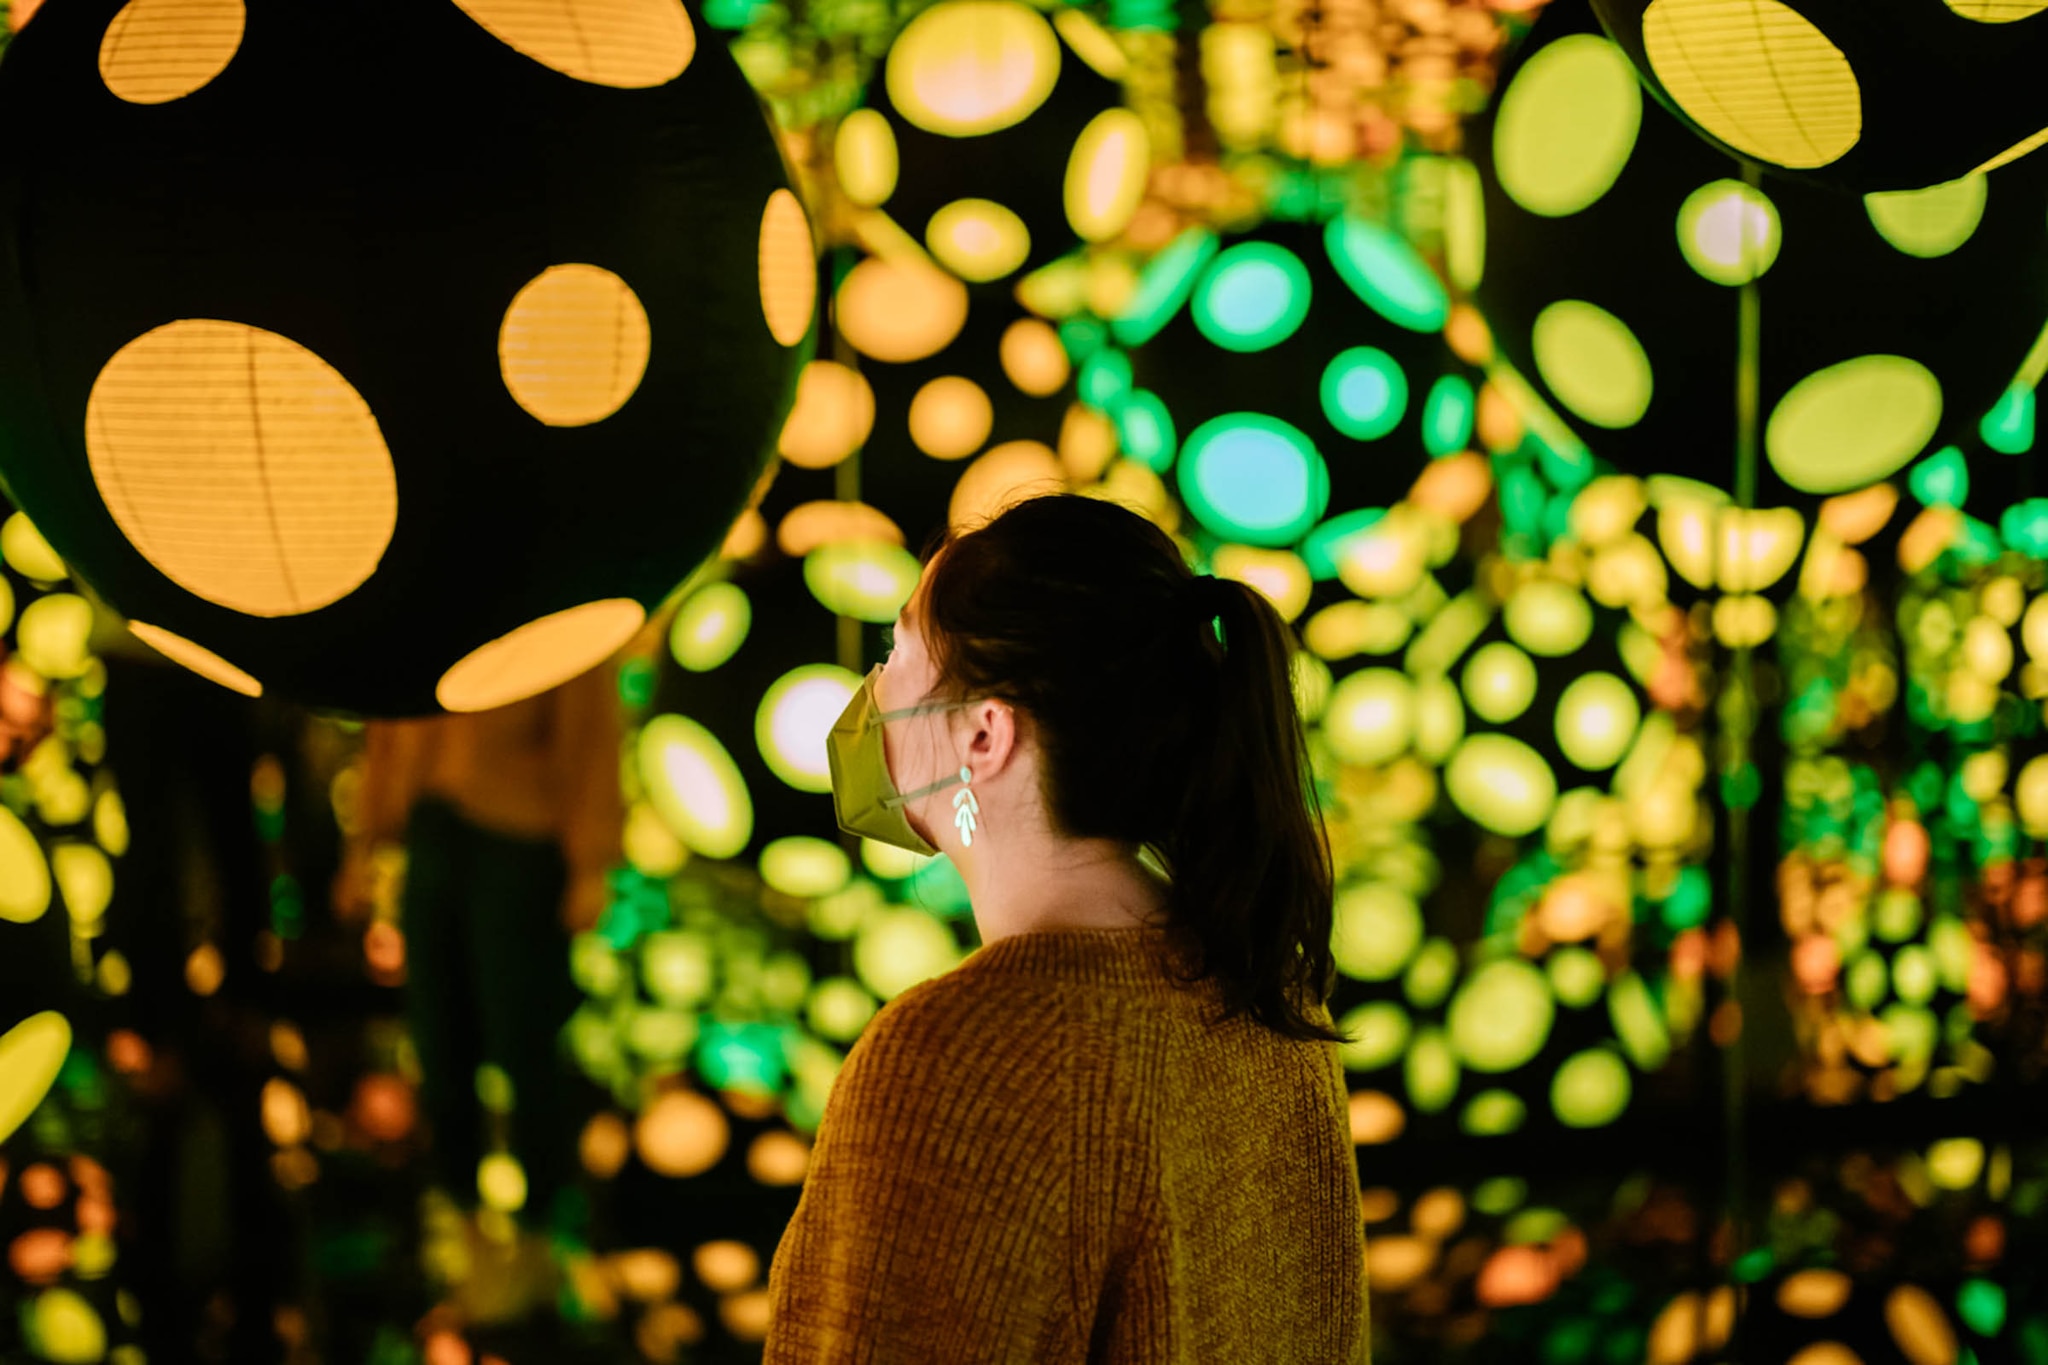 Spring at the Louis Vuitton and Yayoi Kusama Pop up in NYC